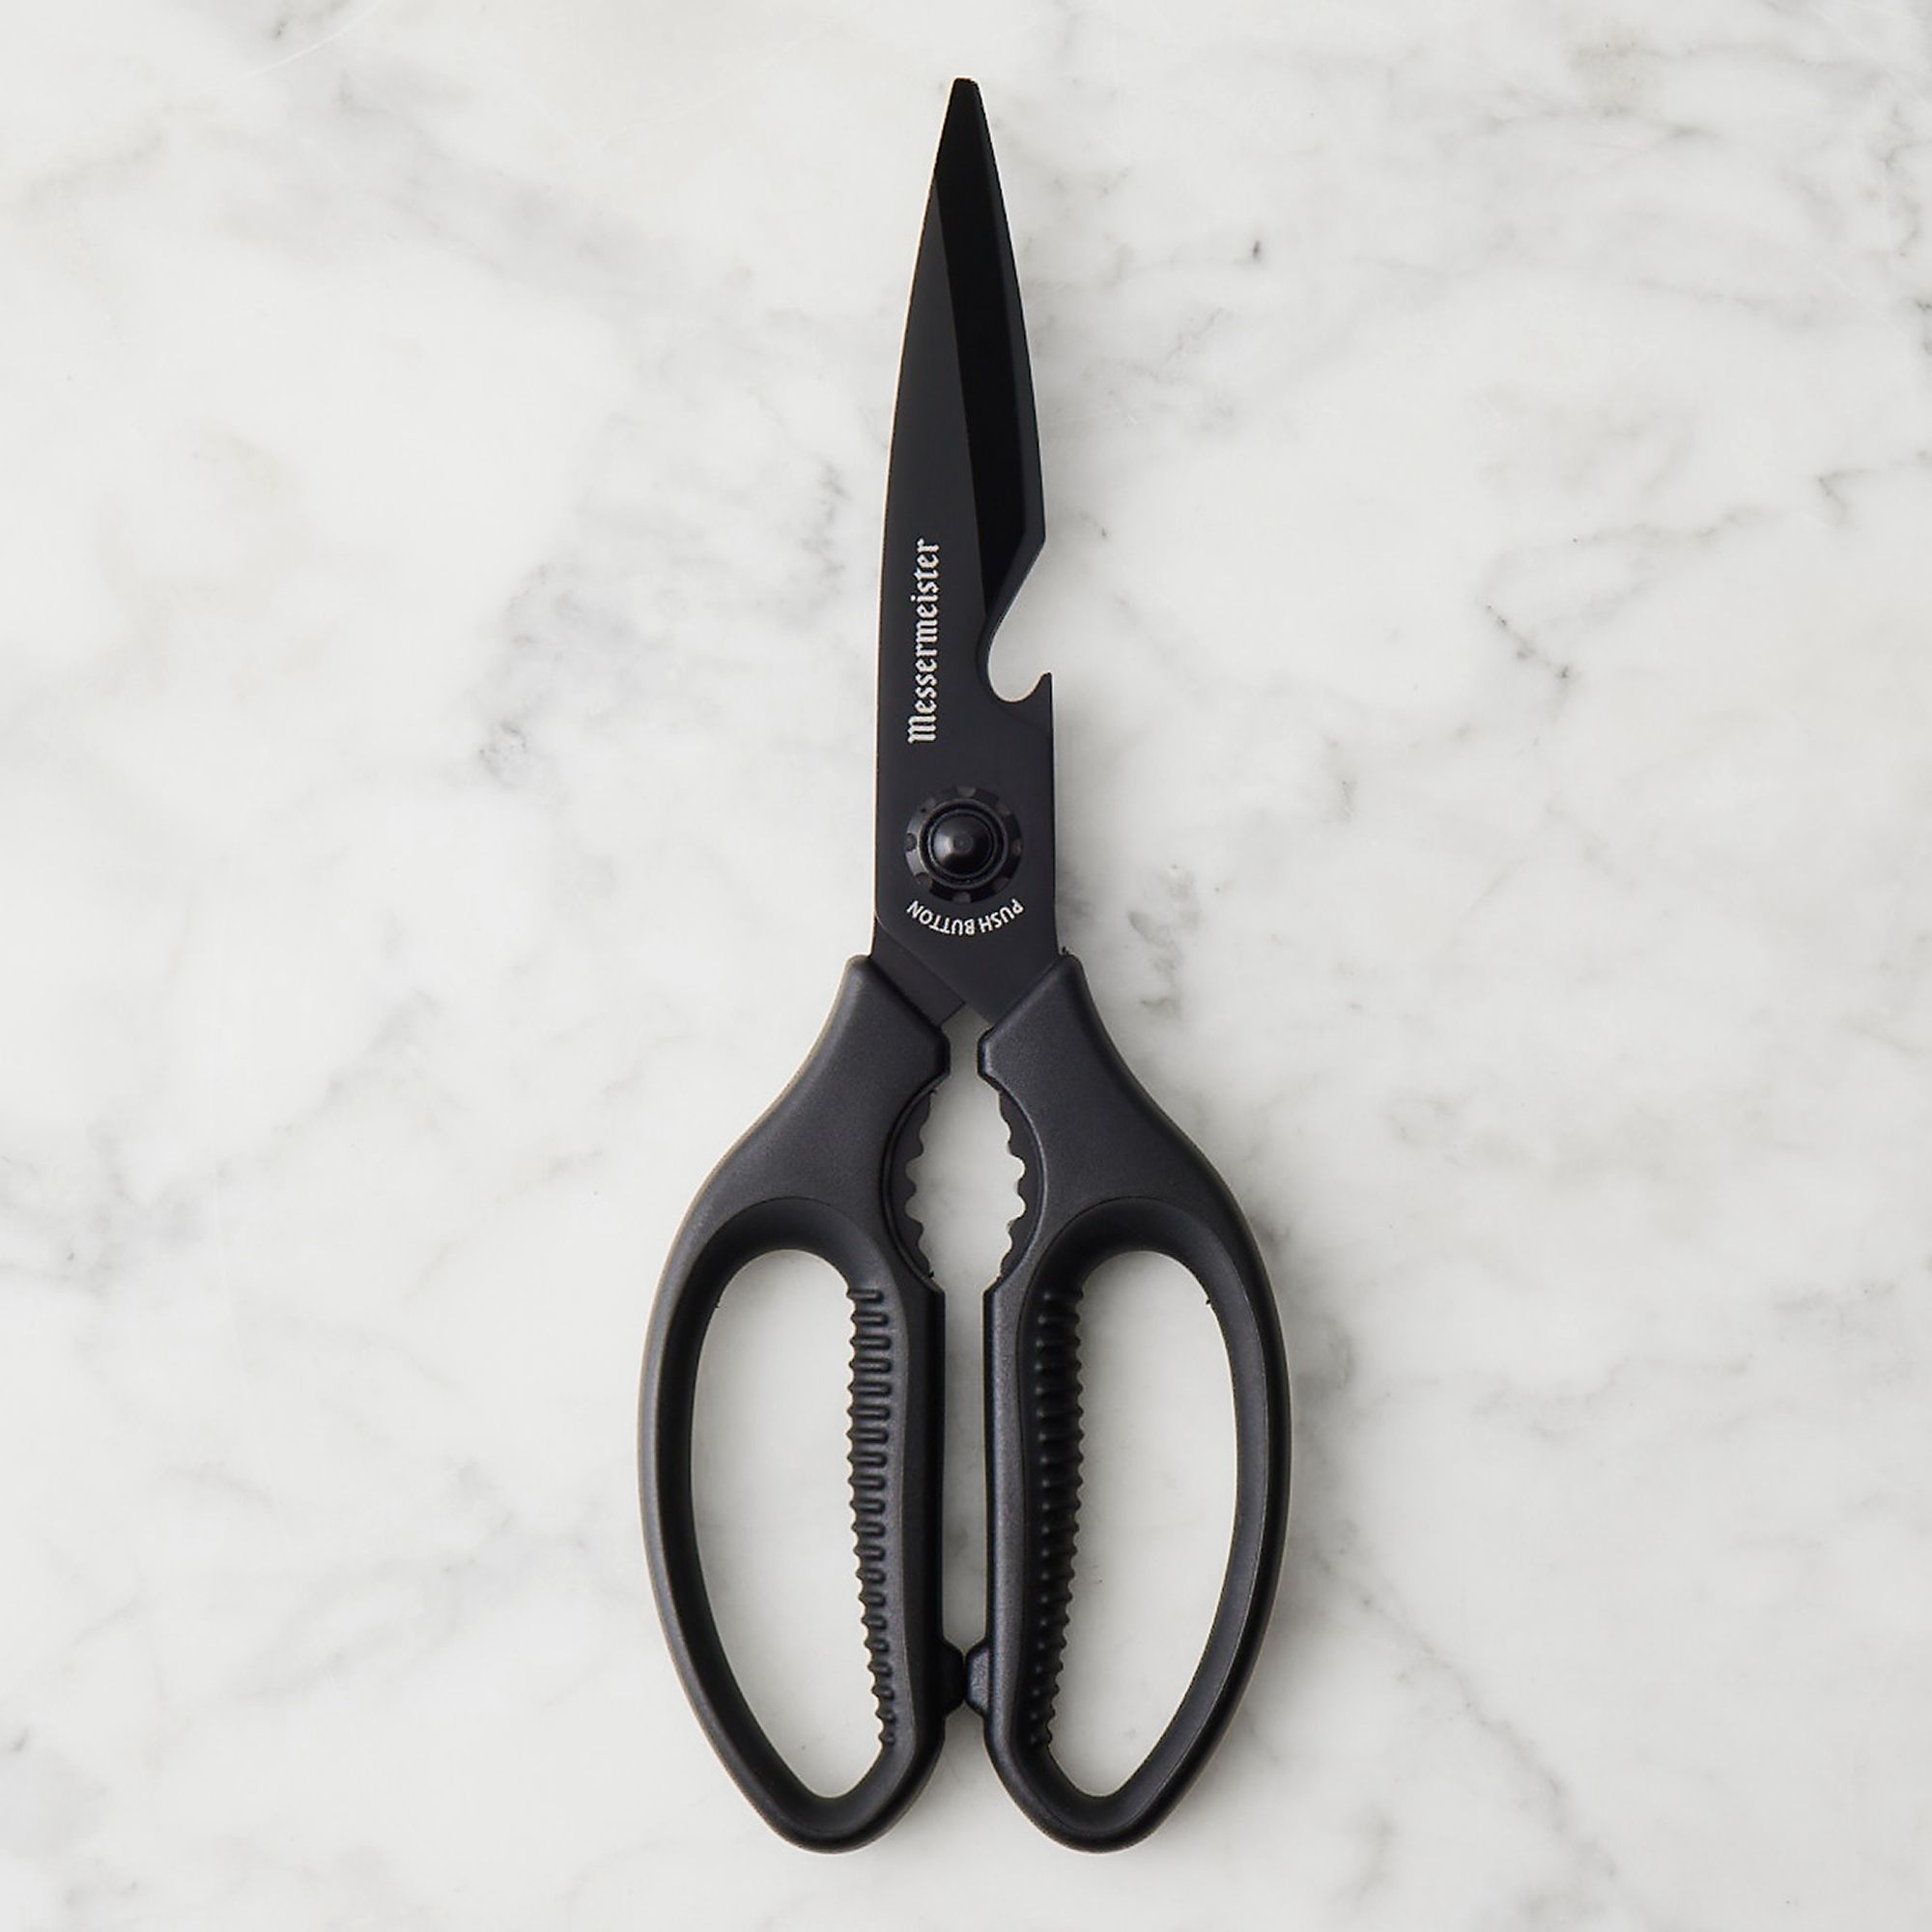 Kitchen Scissors/Shears Forged Come Apart